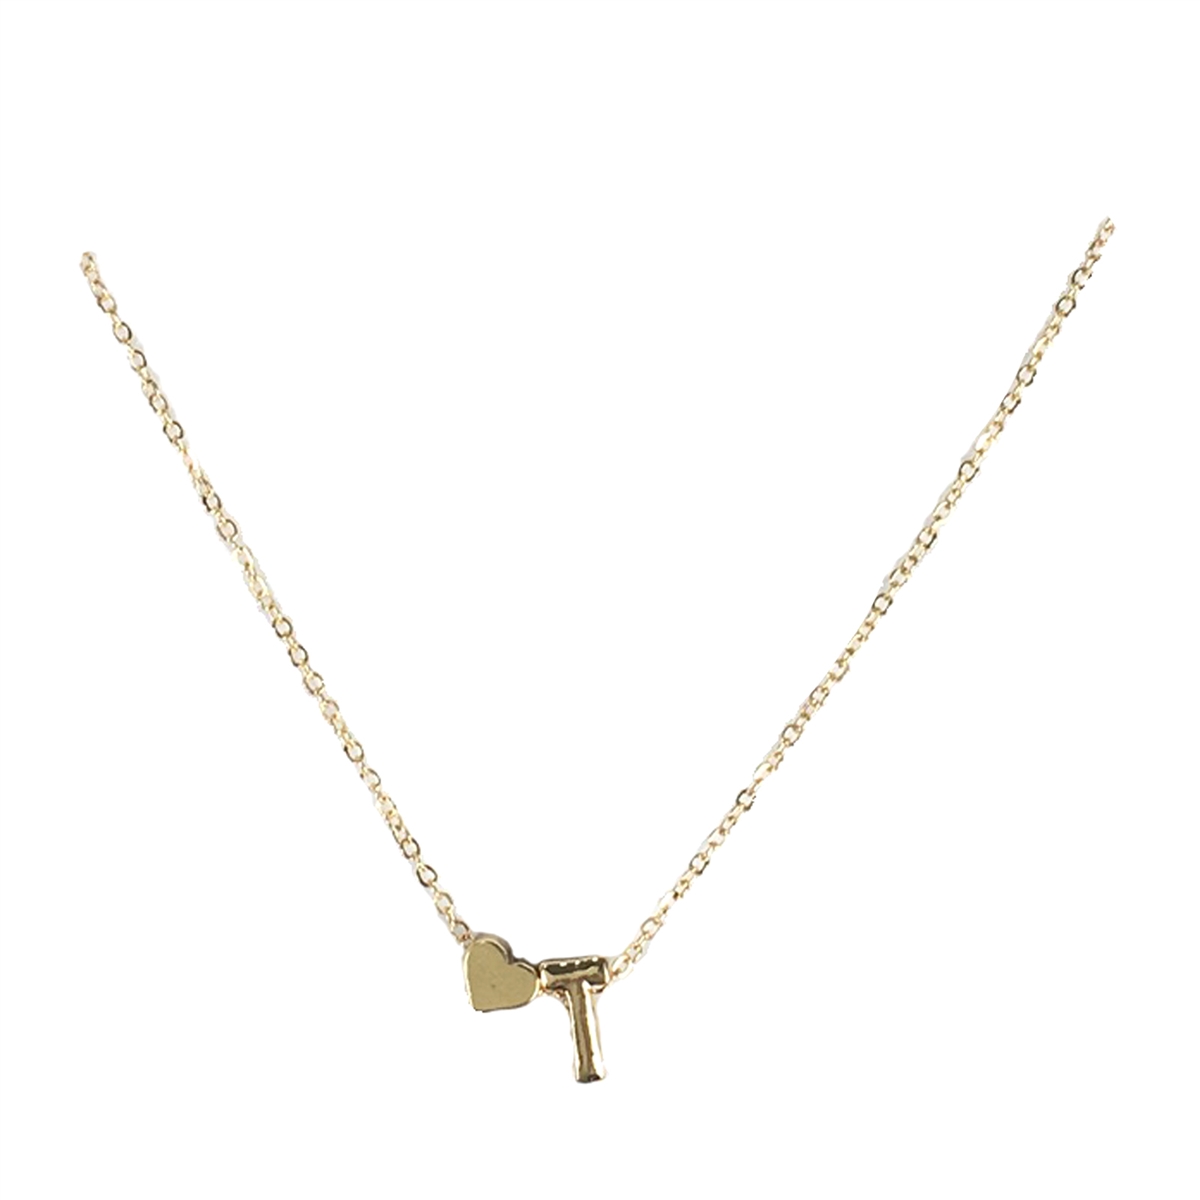 9ct Yellow Gold 'T' Petite Initial Adjustable Letter Necklace 38/43cm